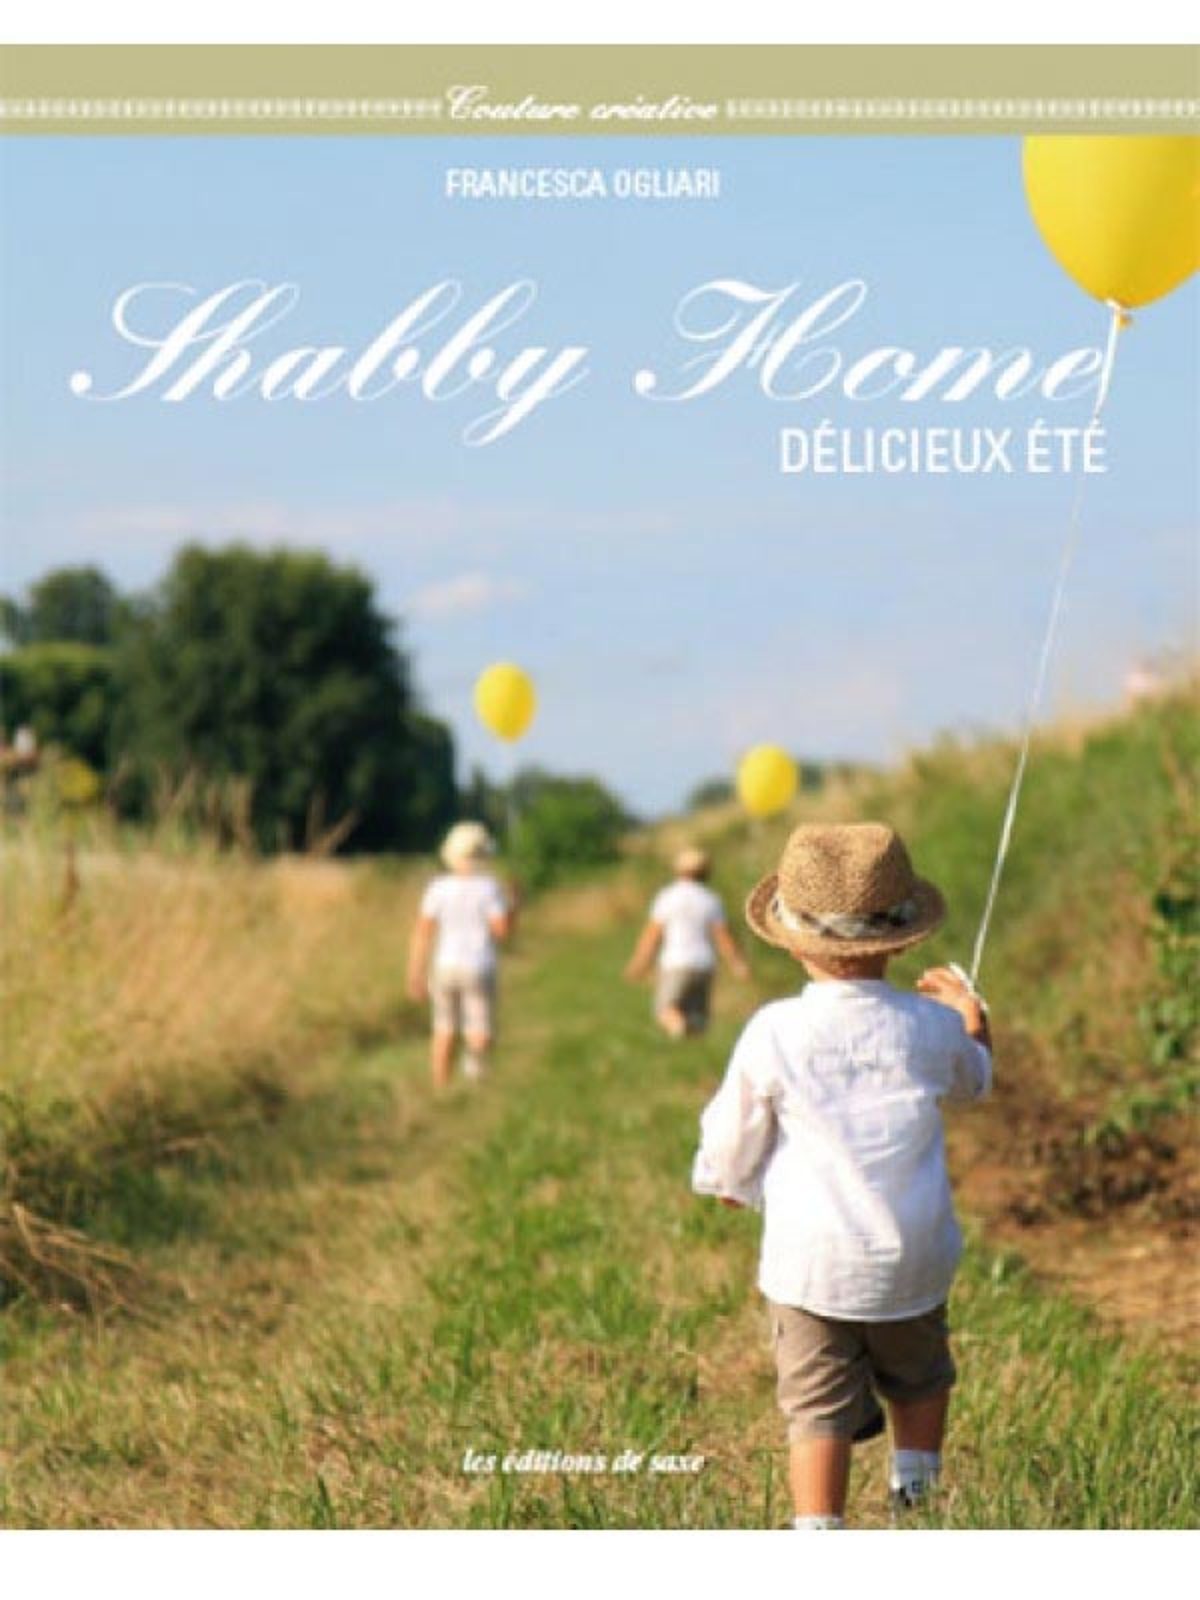 shabby home delicieux ete